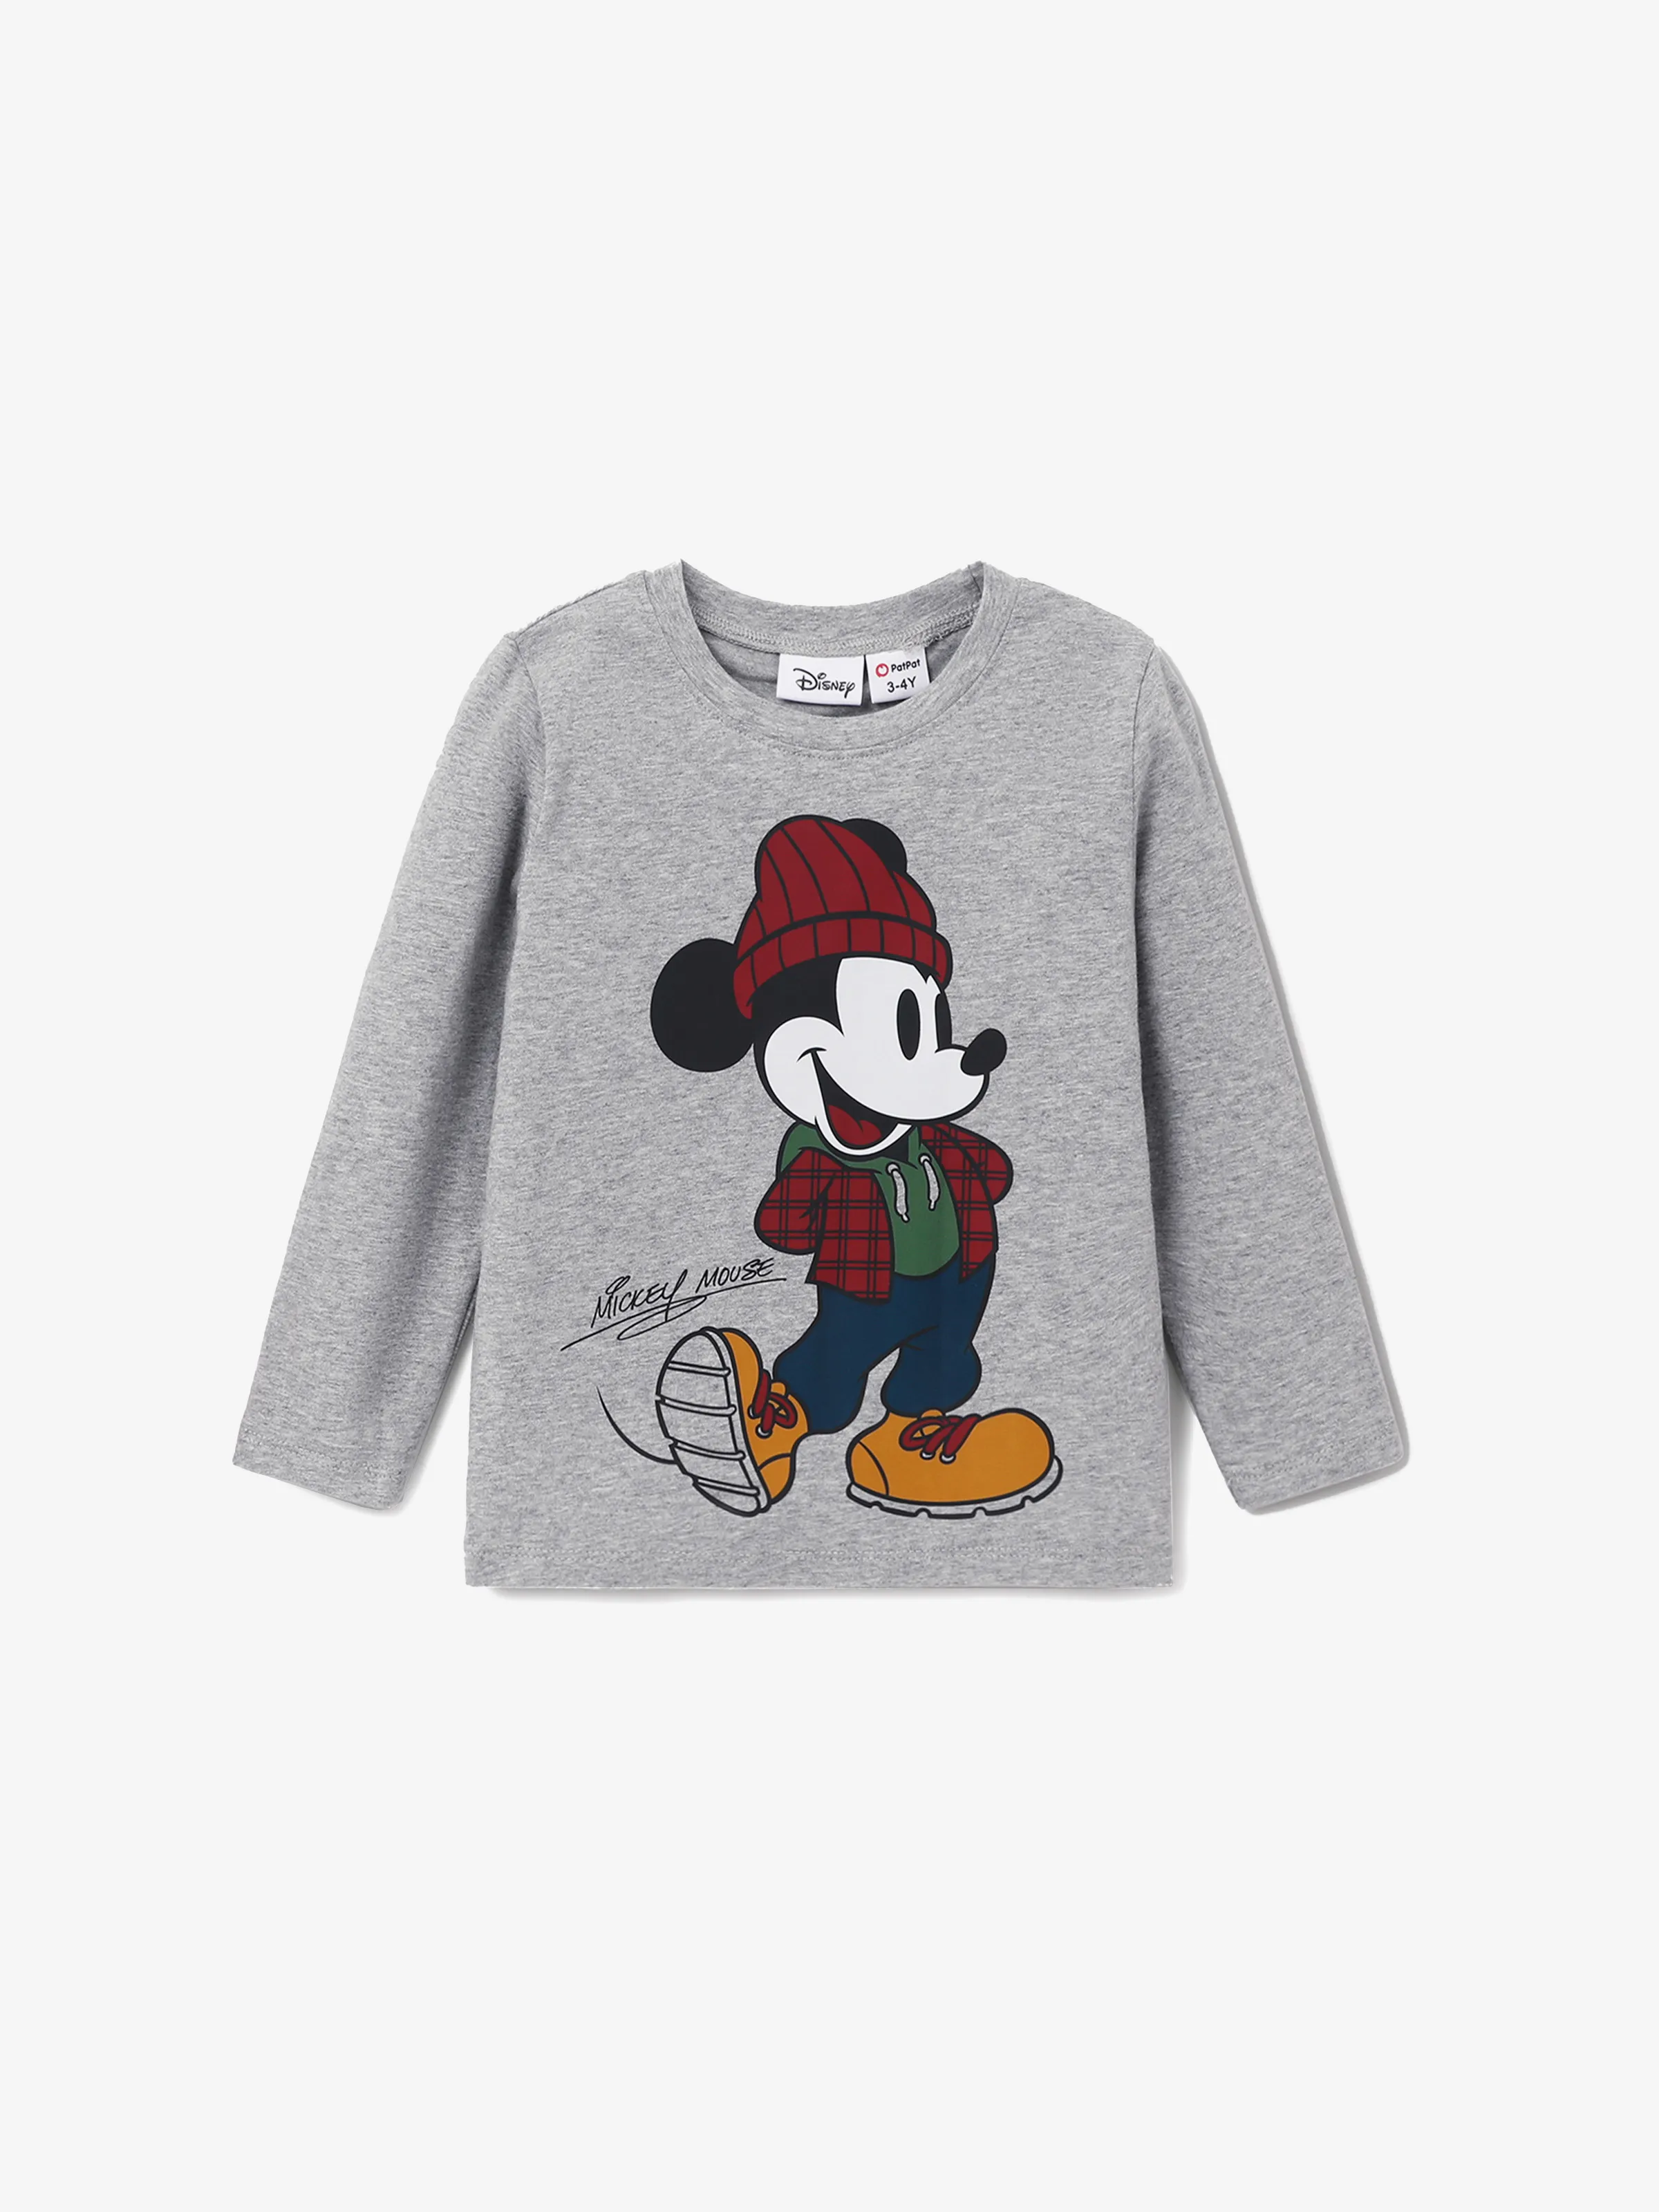 

Disney Mickey and Friends Toddler Boy Cotton Character Pattern 1 Pop-up Ears Jacket or 1 Long-sleeve Top or Pants